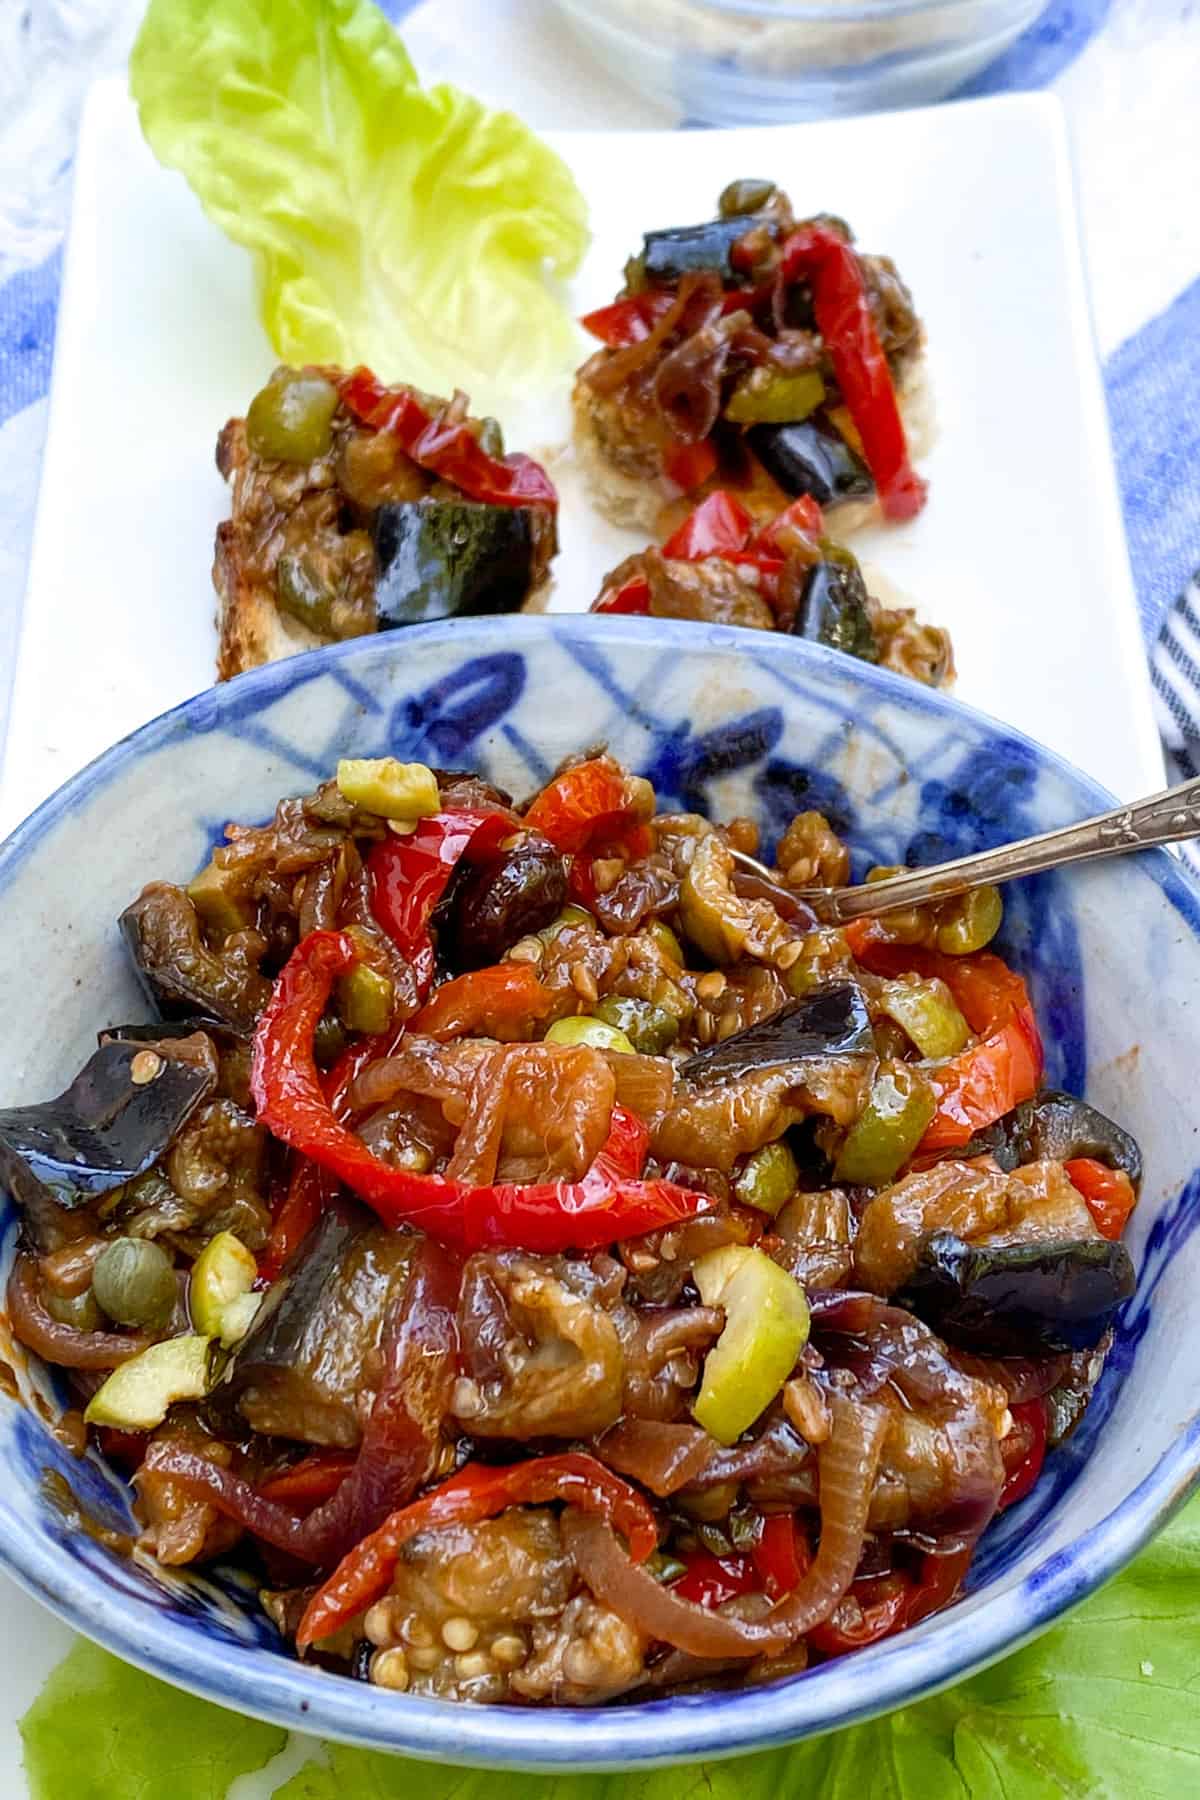 bowl of caponata showing stewed pieces of eggplant, sliced peppers, chopped olives and capers.